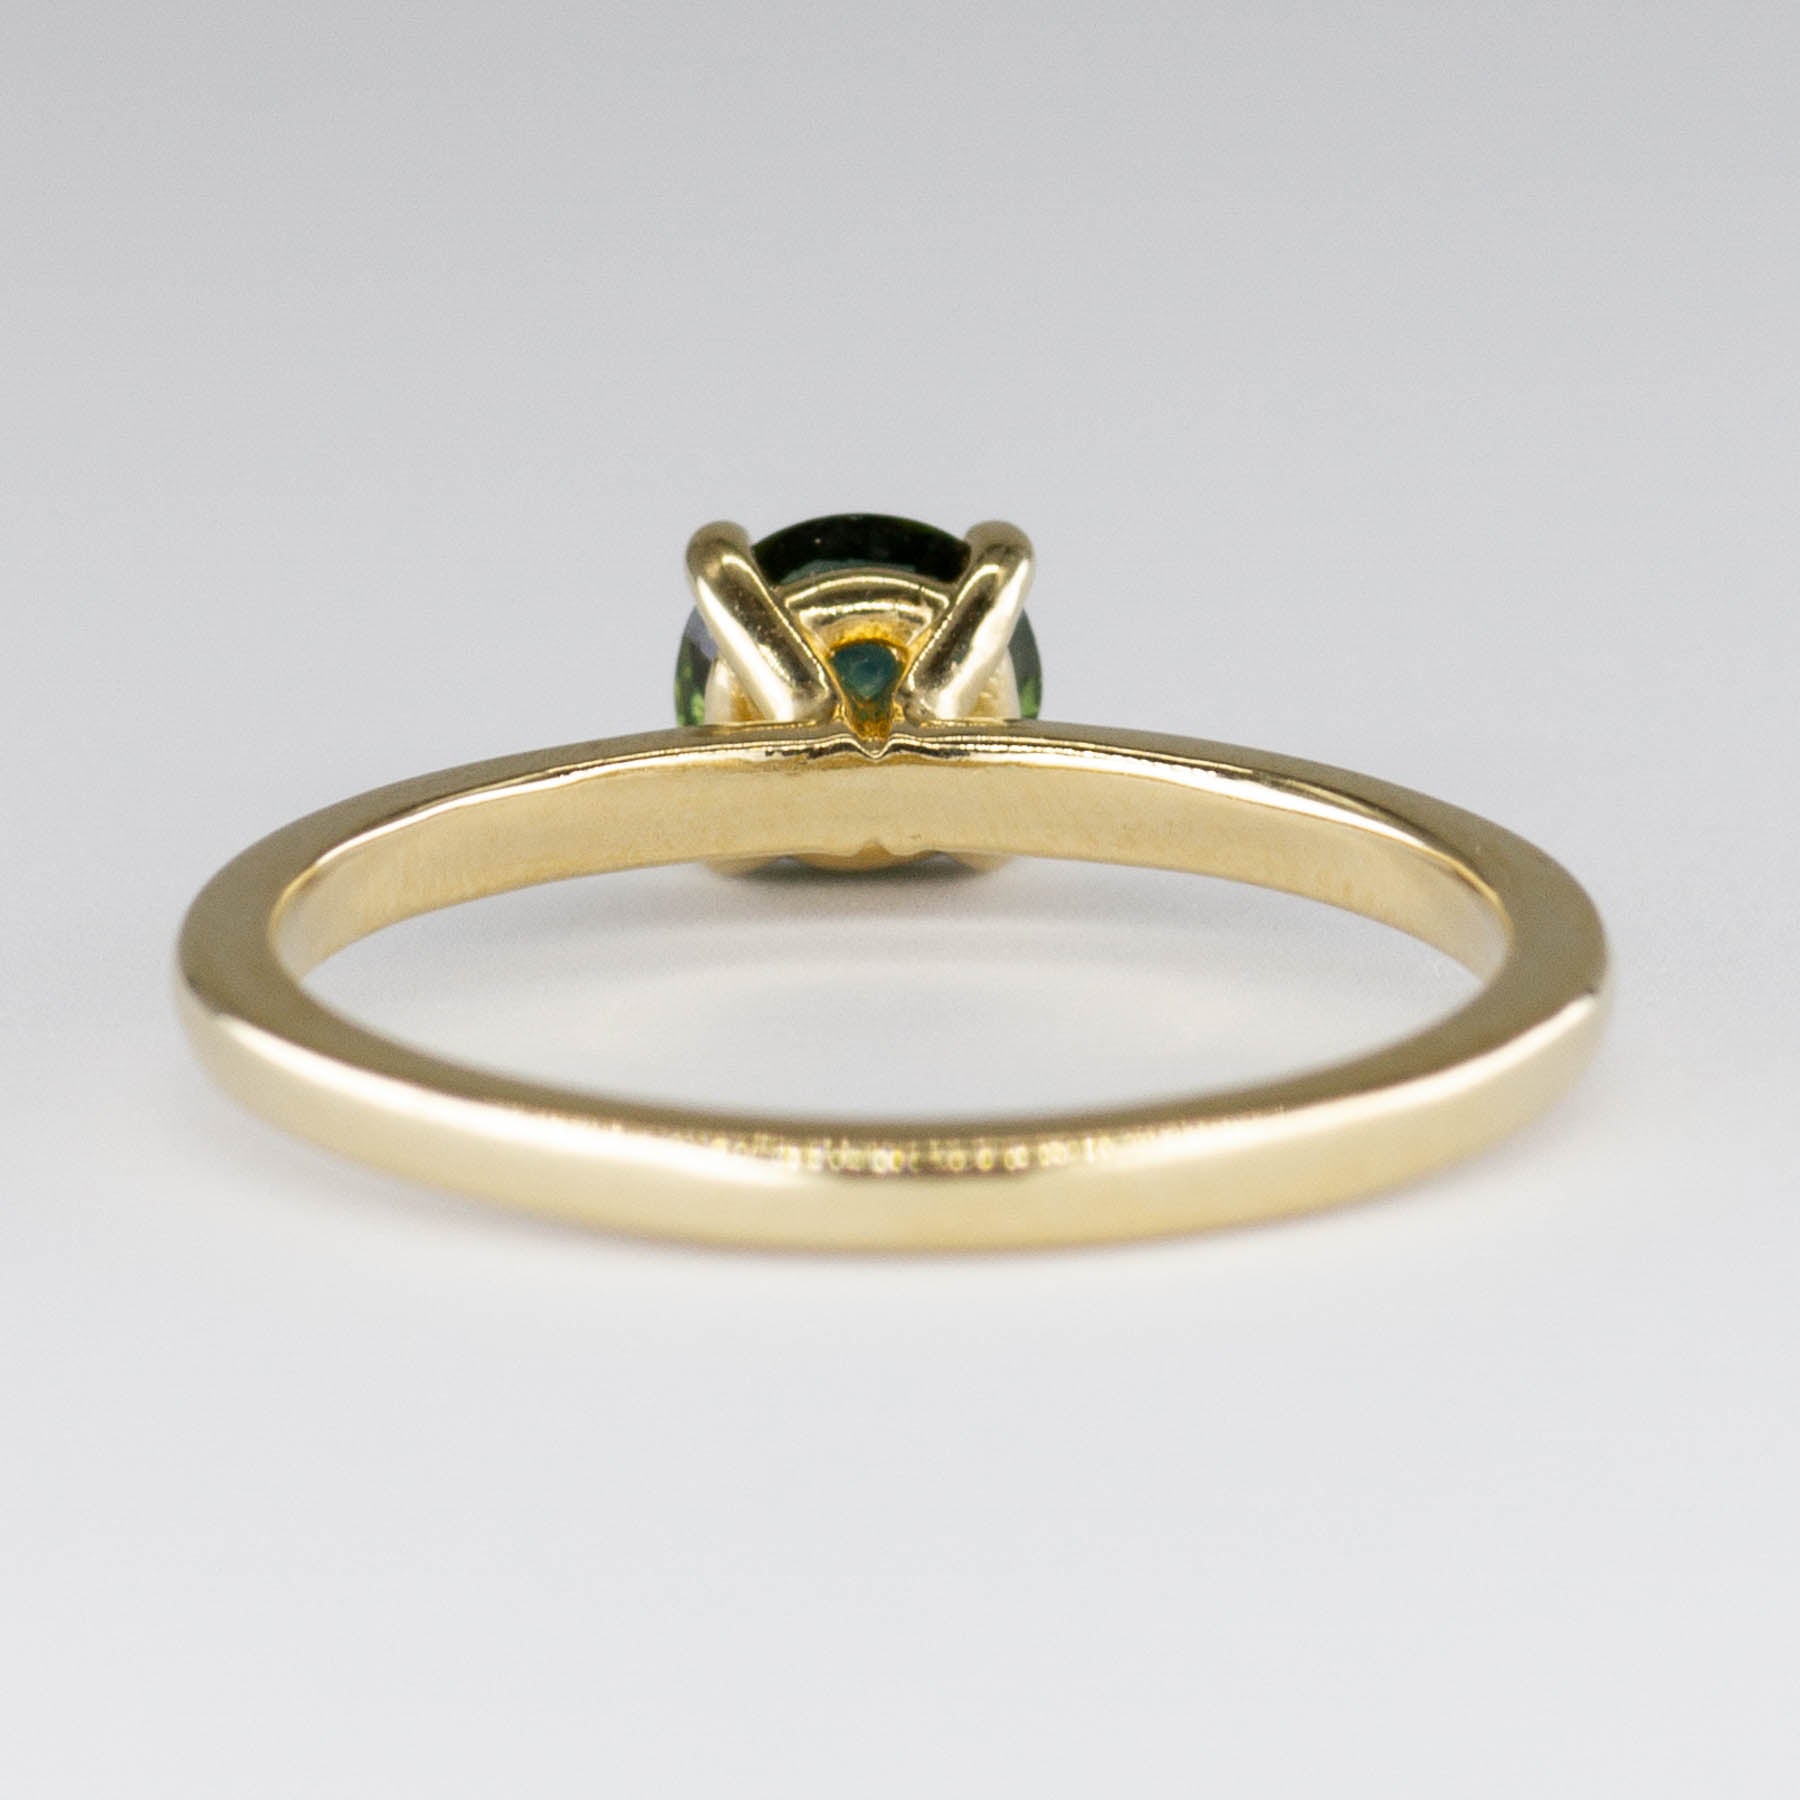 '100 Ways' 14k Yellow Gold Sapphire Solitaire Ring | 0.30ct | SZ 6.75 - 100 Ways